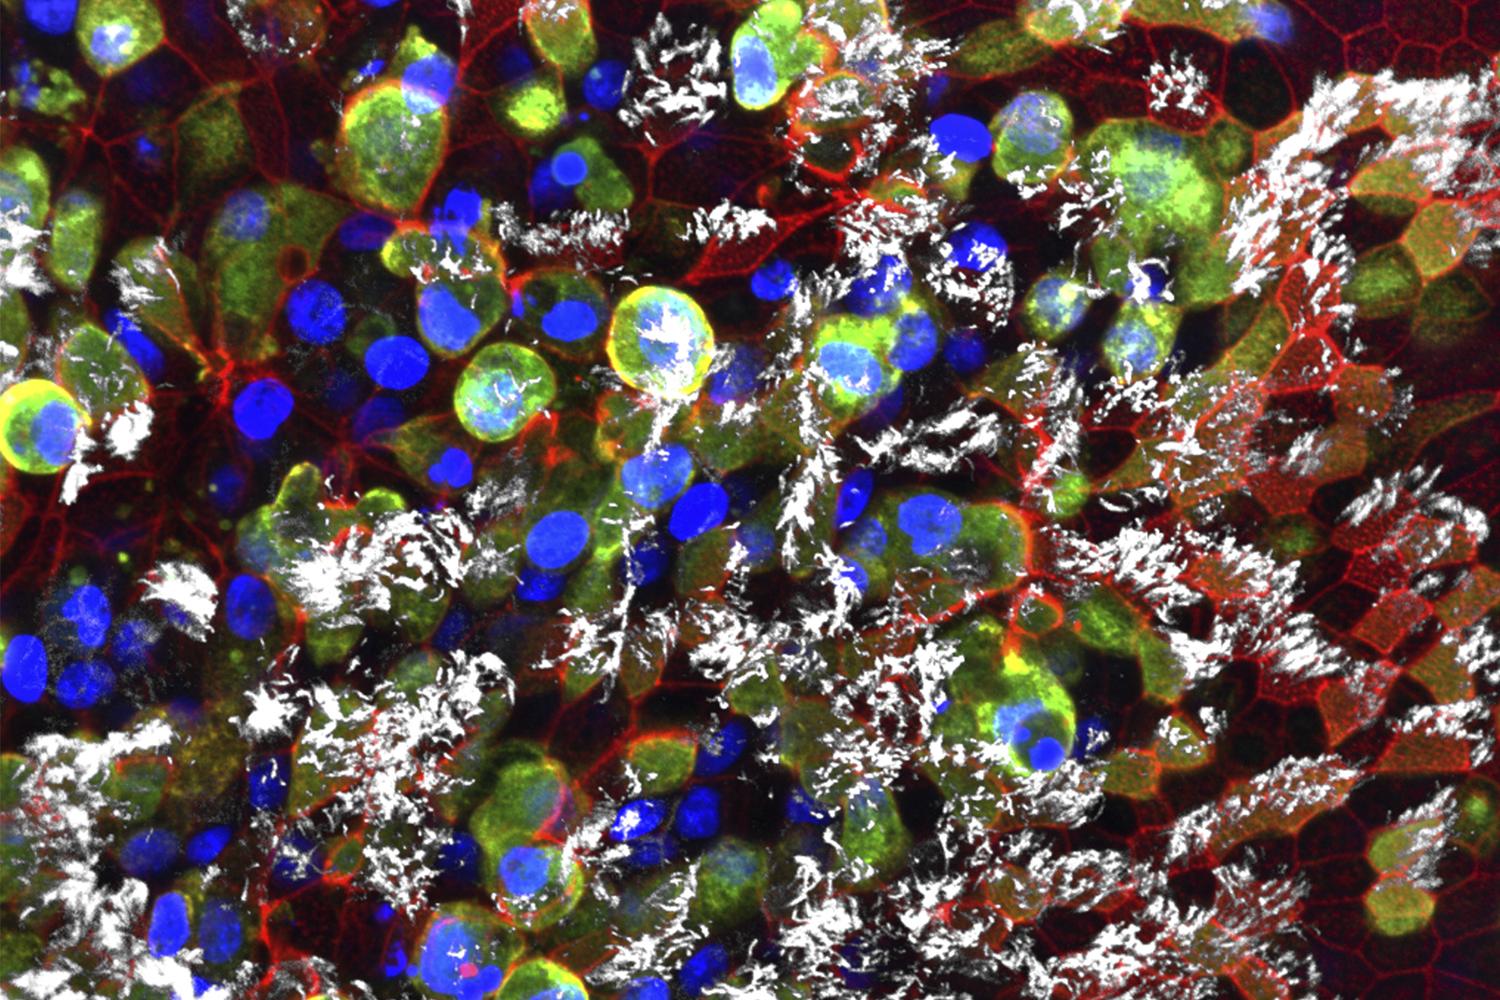 confocal microscope image of SARS-CoV-2 attacking lung cells